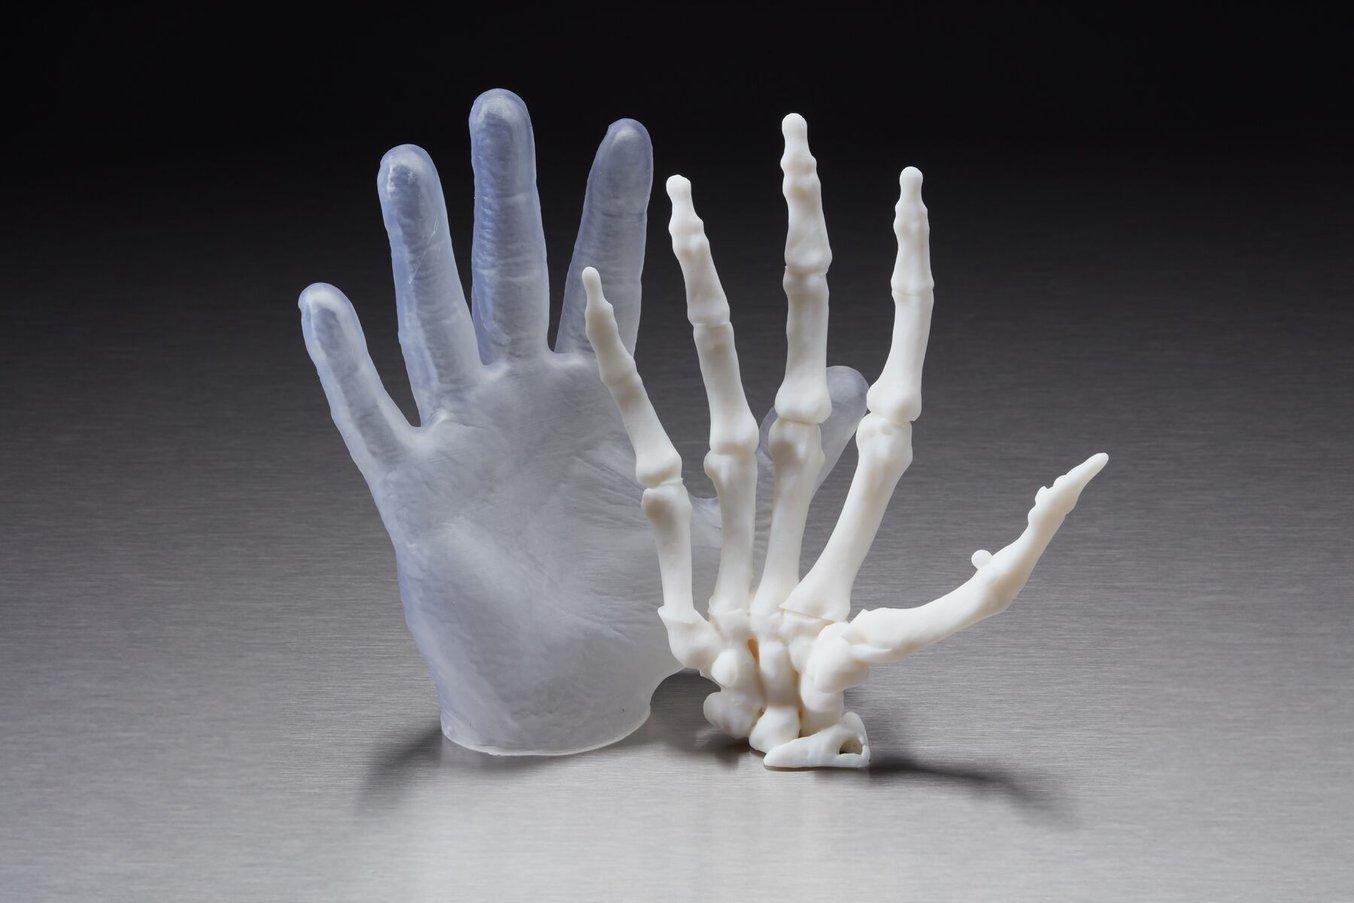 3D printed skin and skeleton of a hand